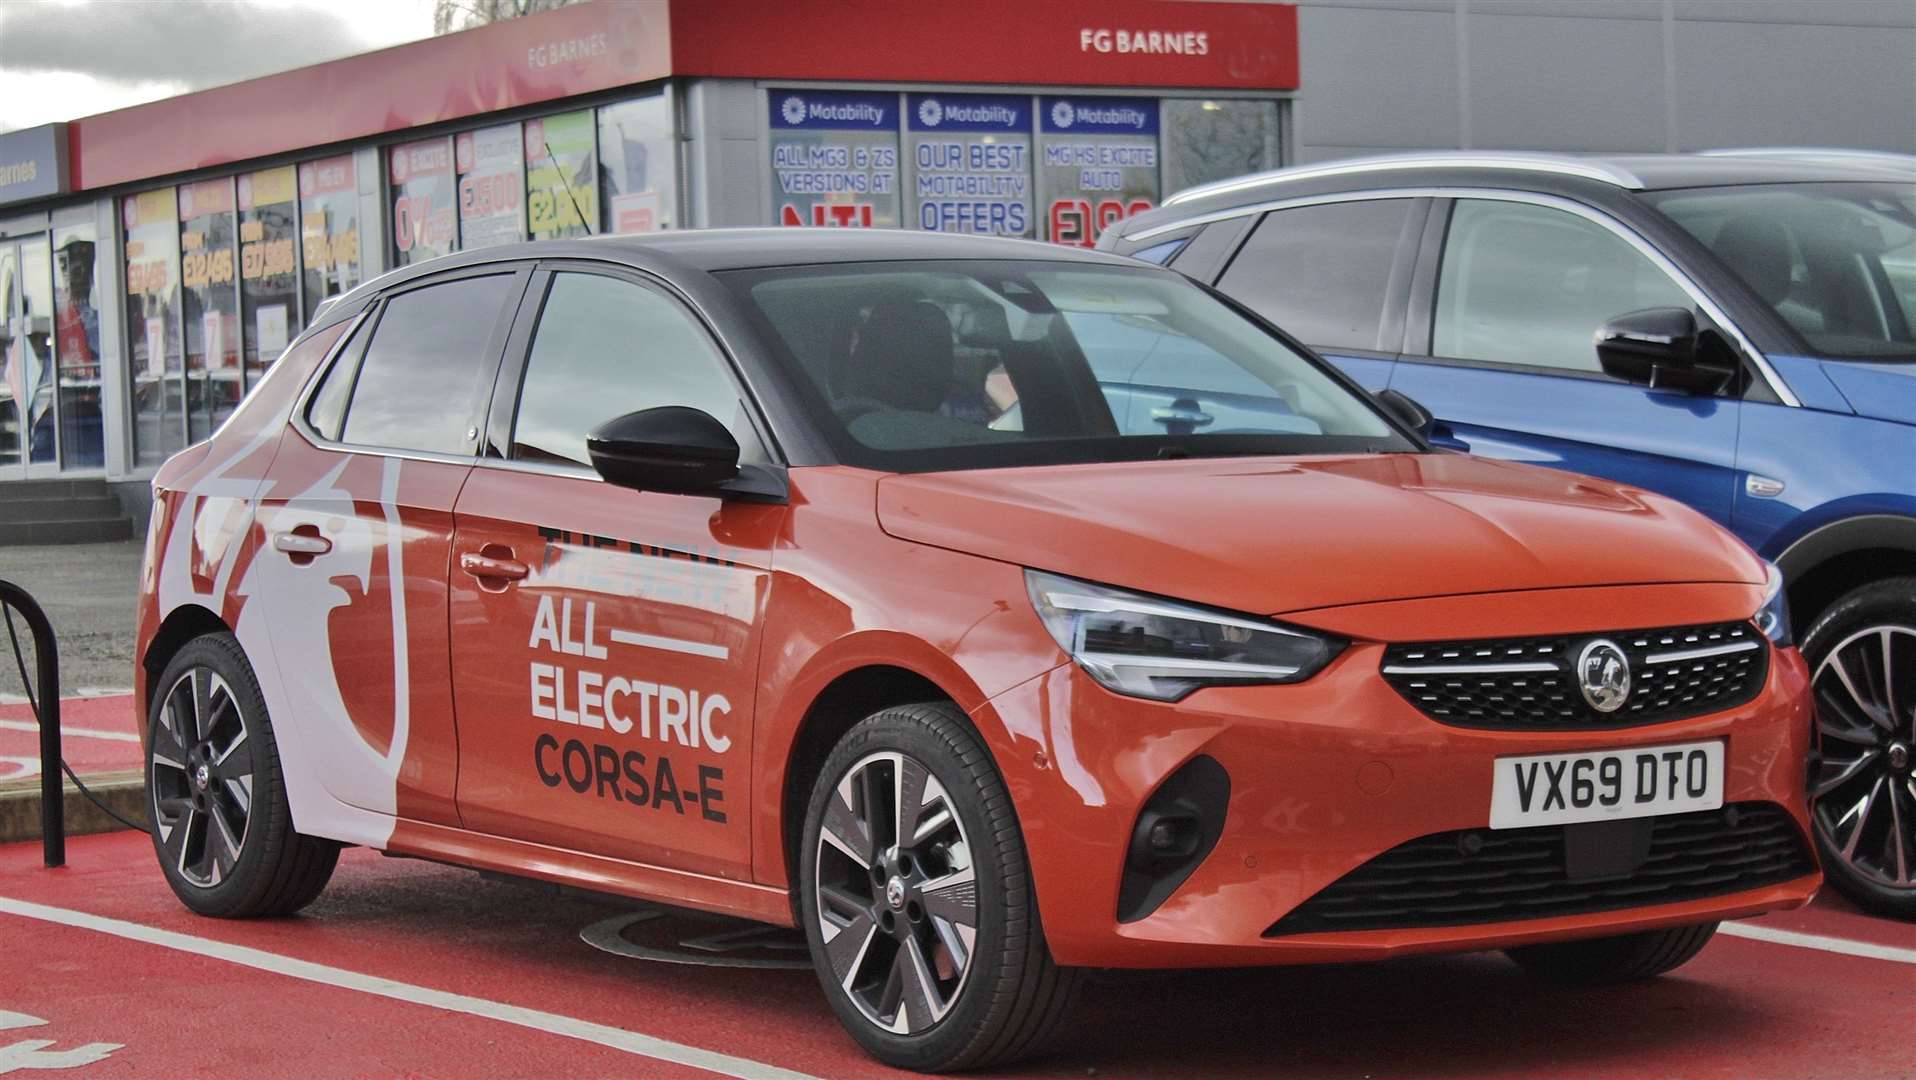 For electric cars like this Vauxhall Corsa-e available from FG Barnes, there are no congestion charges or car tax to pay while many councils offer free parking.